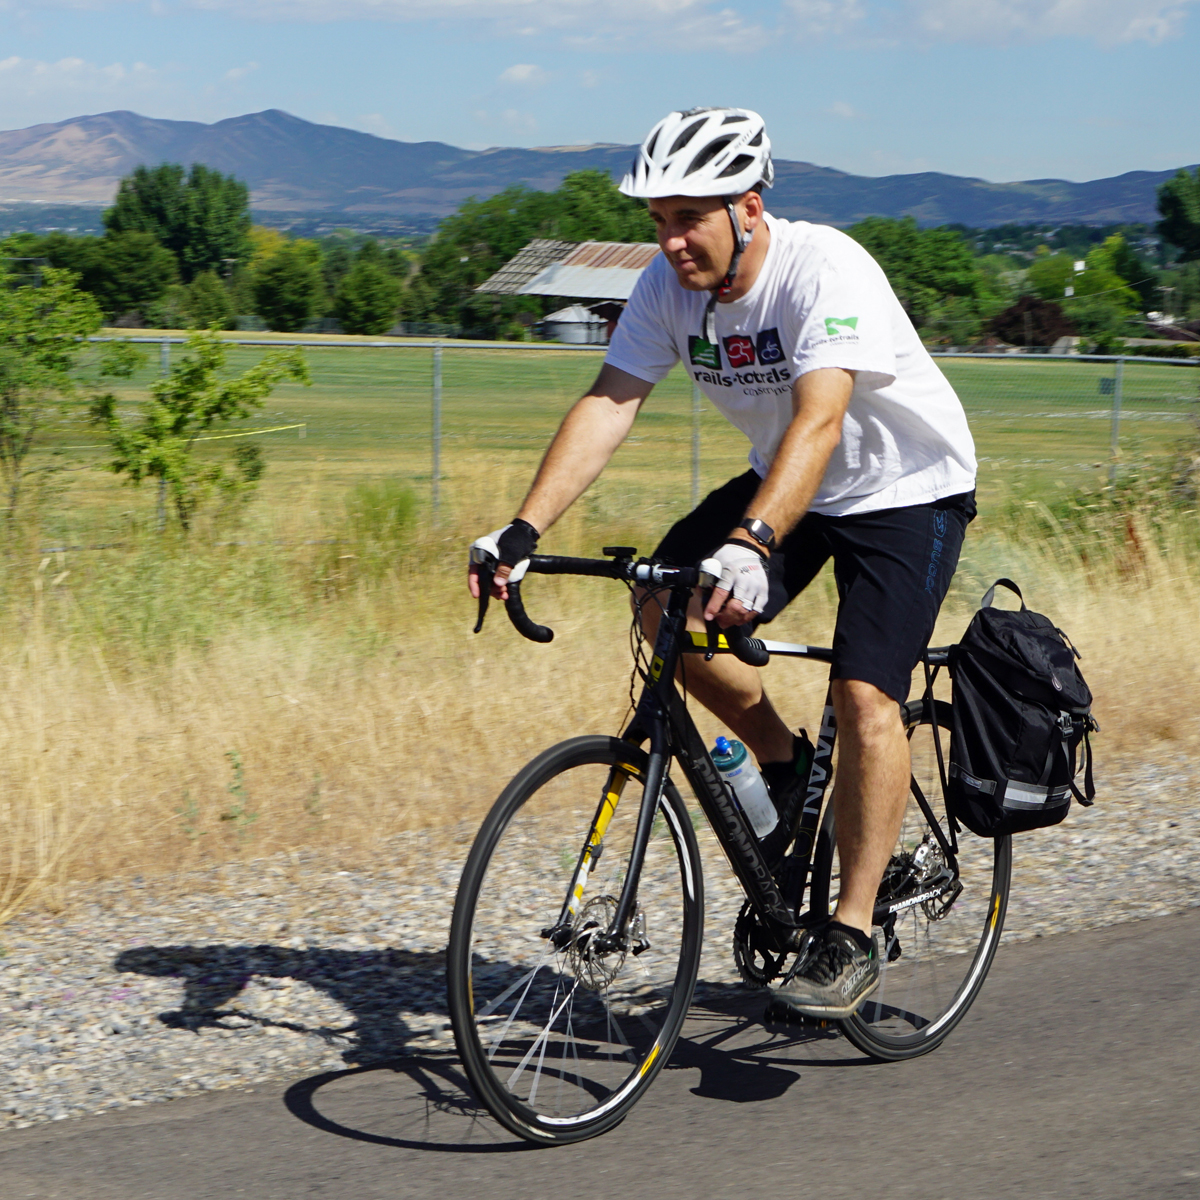 Peter riding from Orem to Lehi on the Murdock Canal Trail. Photo by Mary Drinkwater